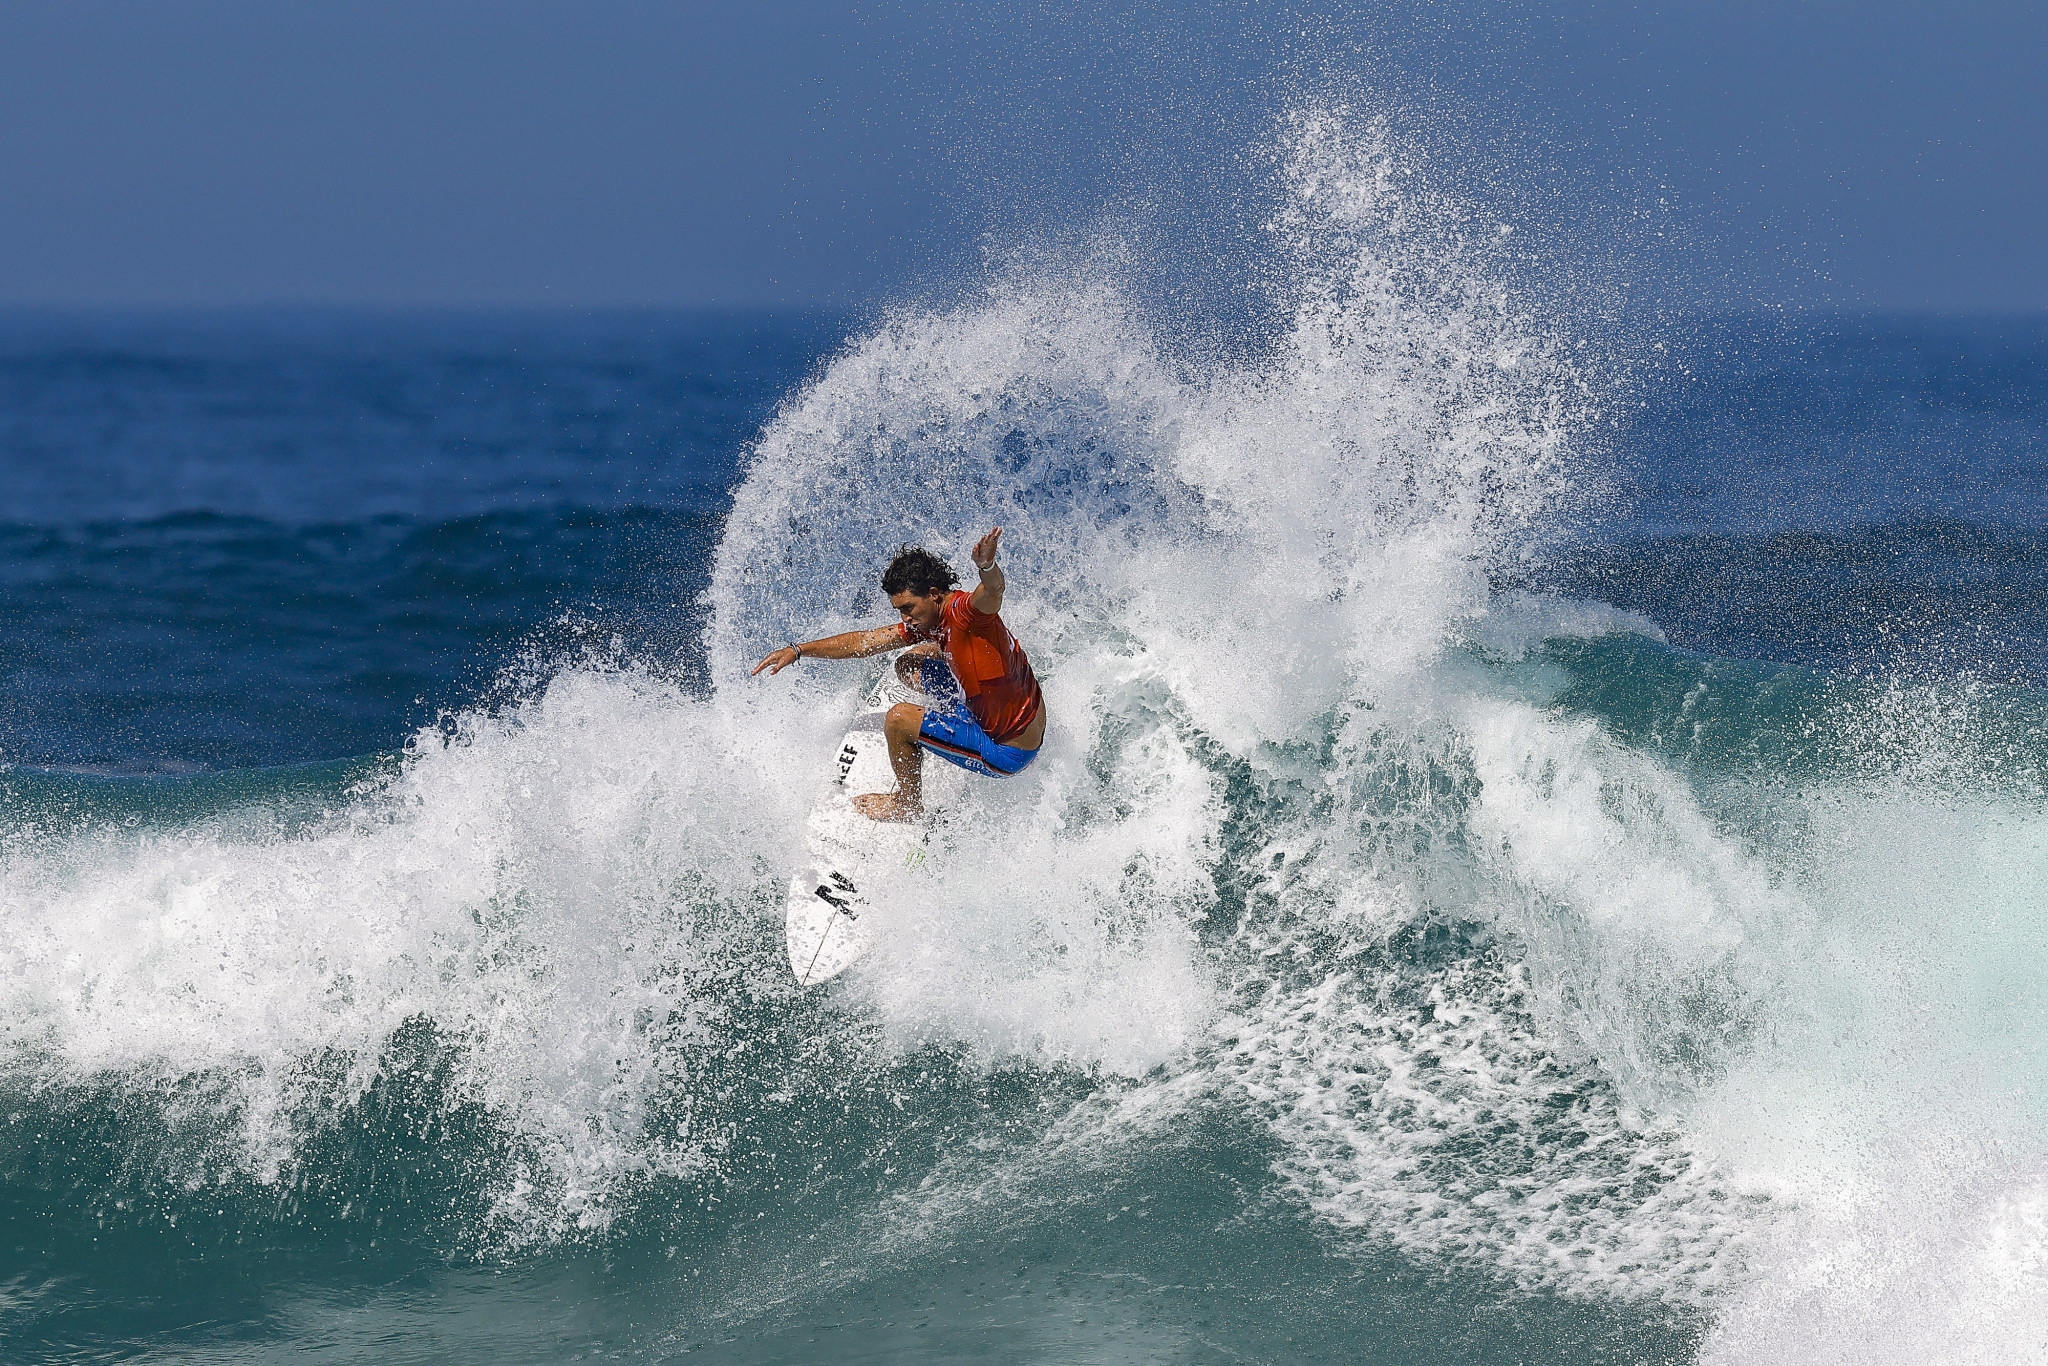 Colapinto and Waida bounce back at World Surfing Games